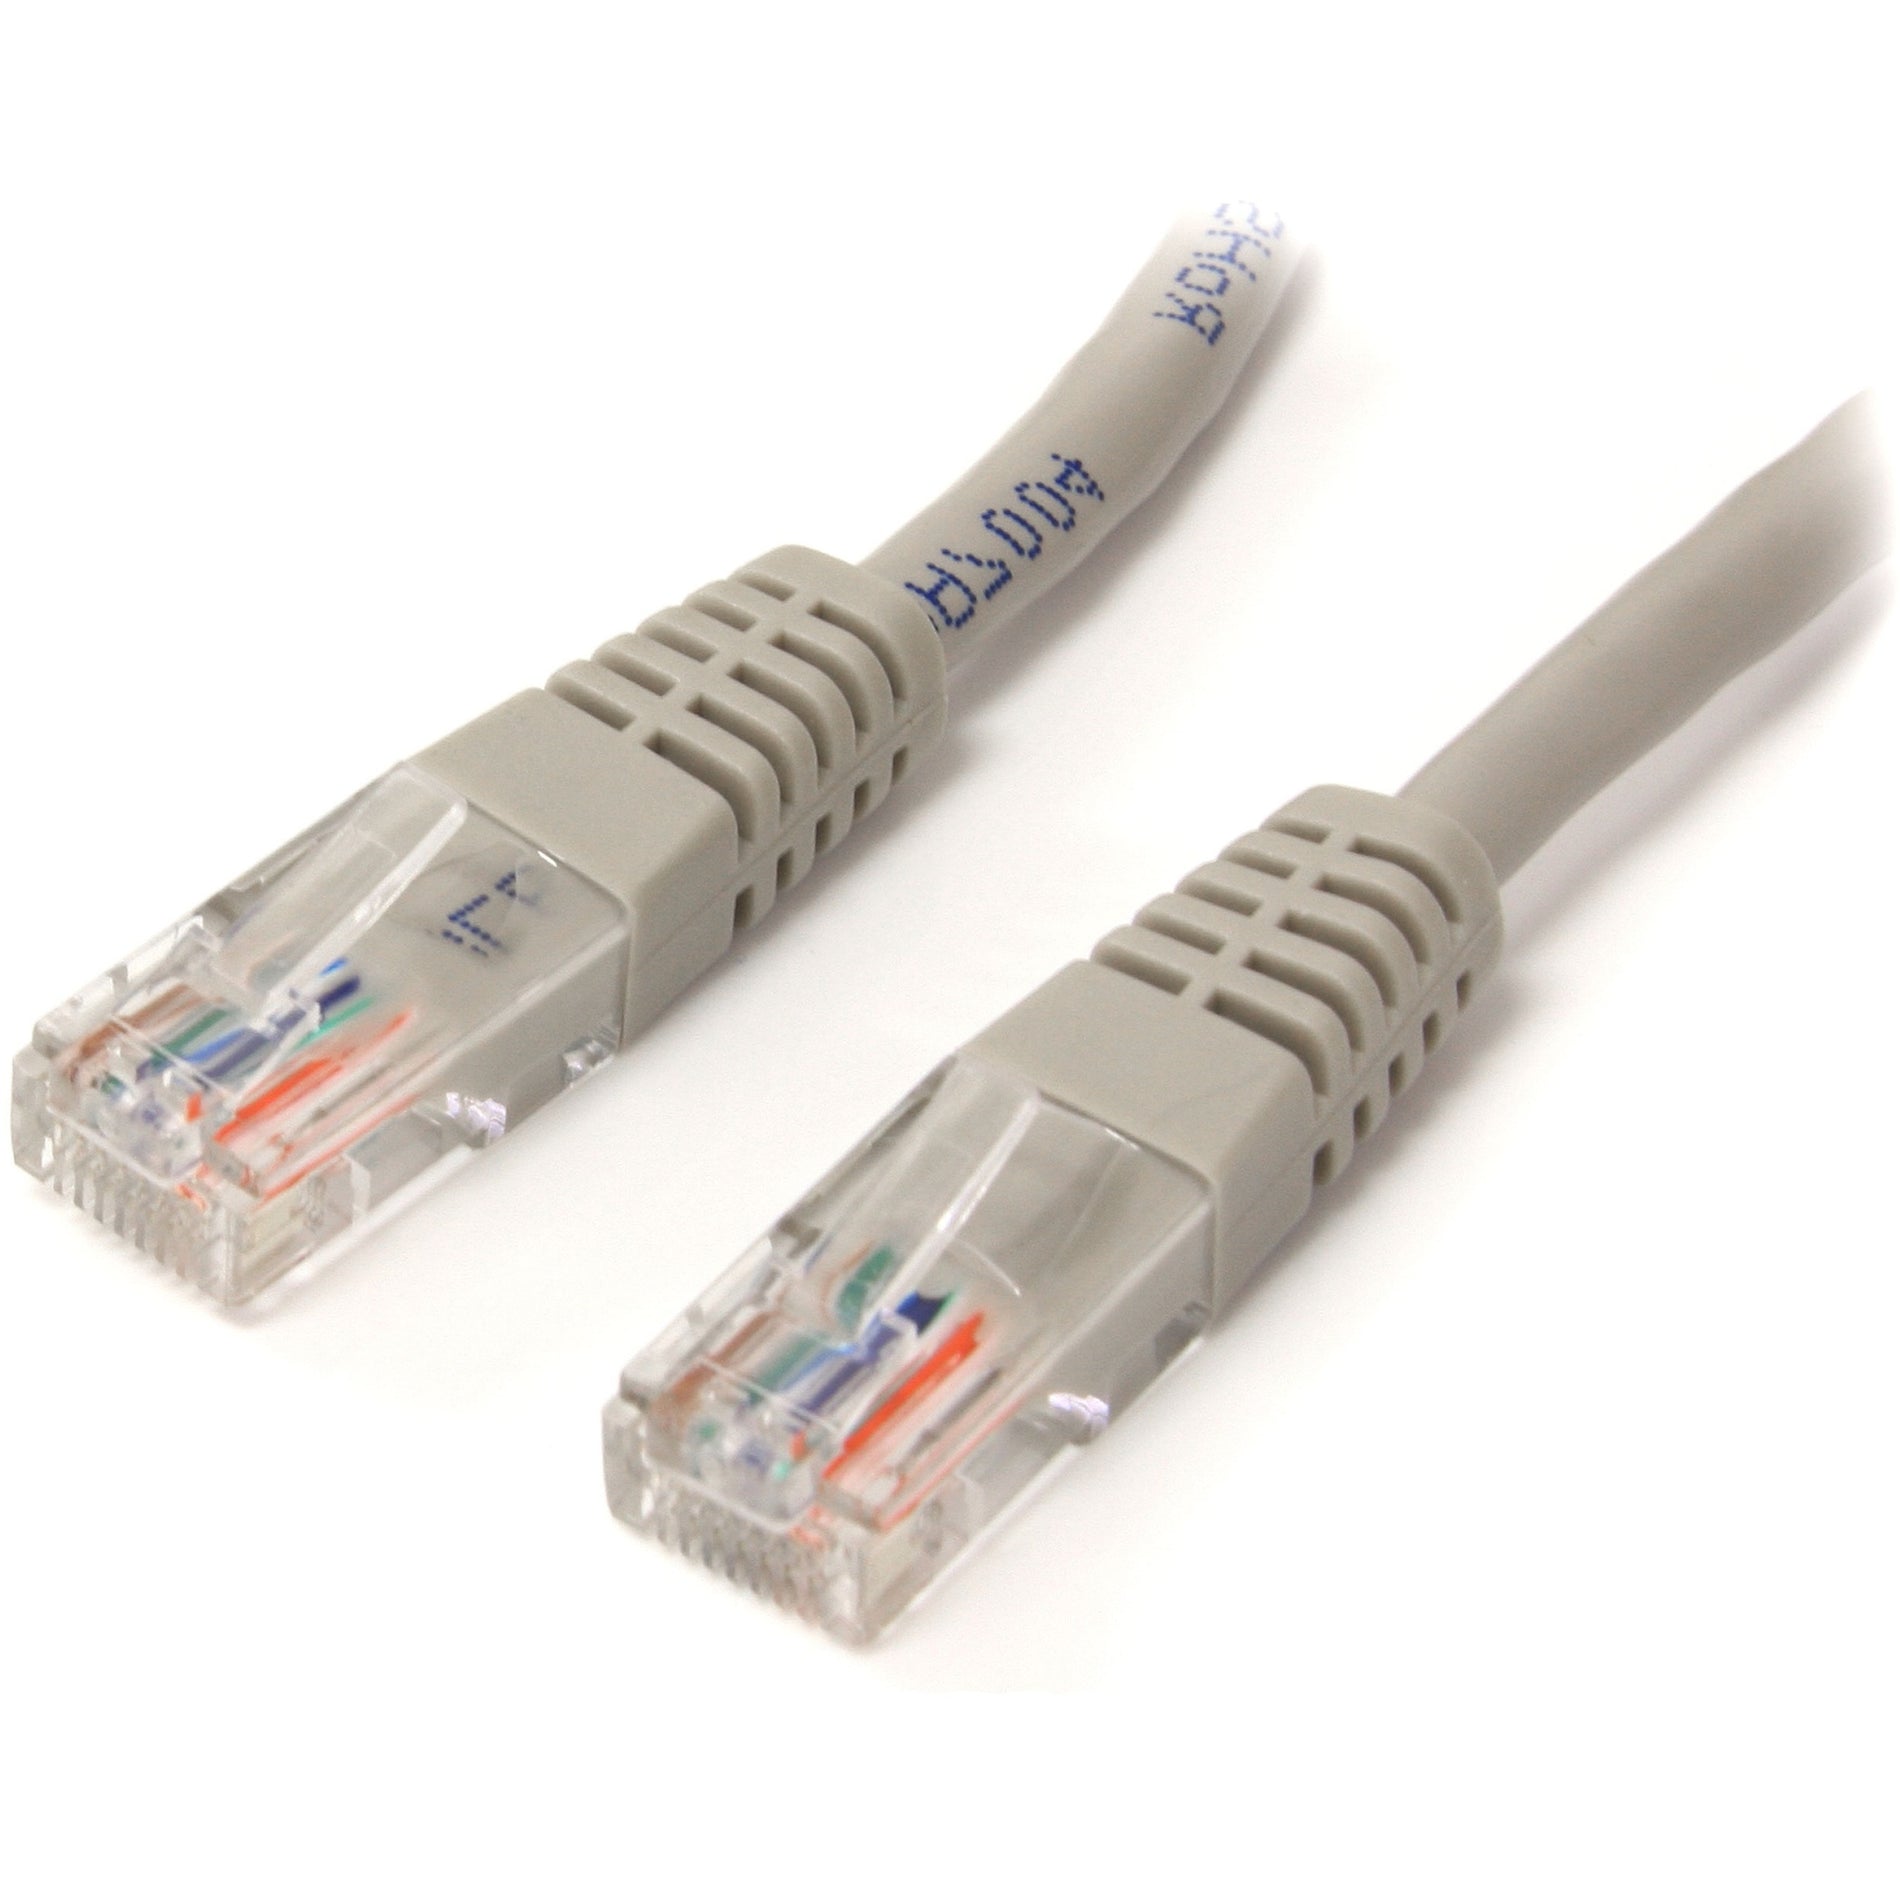 StarTech.com M45PATCH7GR Category 5e Cable, 7 ft Gray Molded Patch Cable